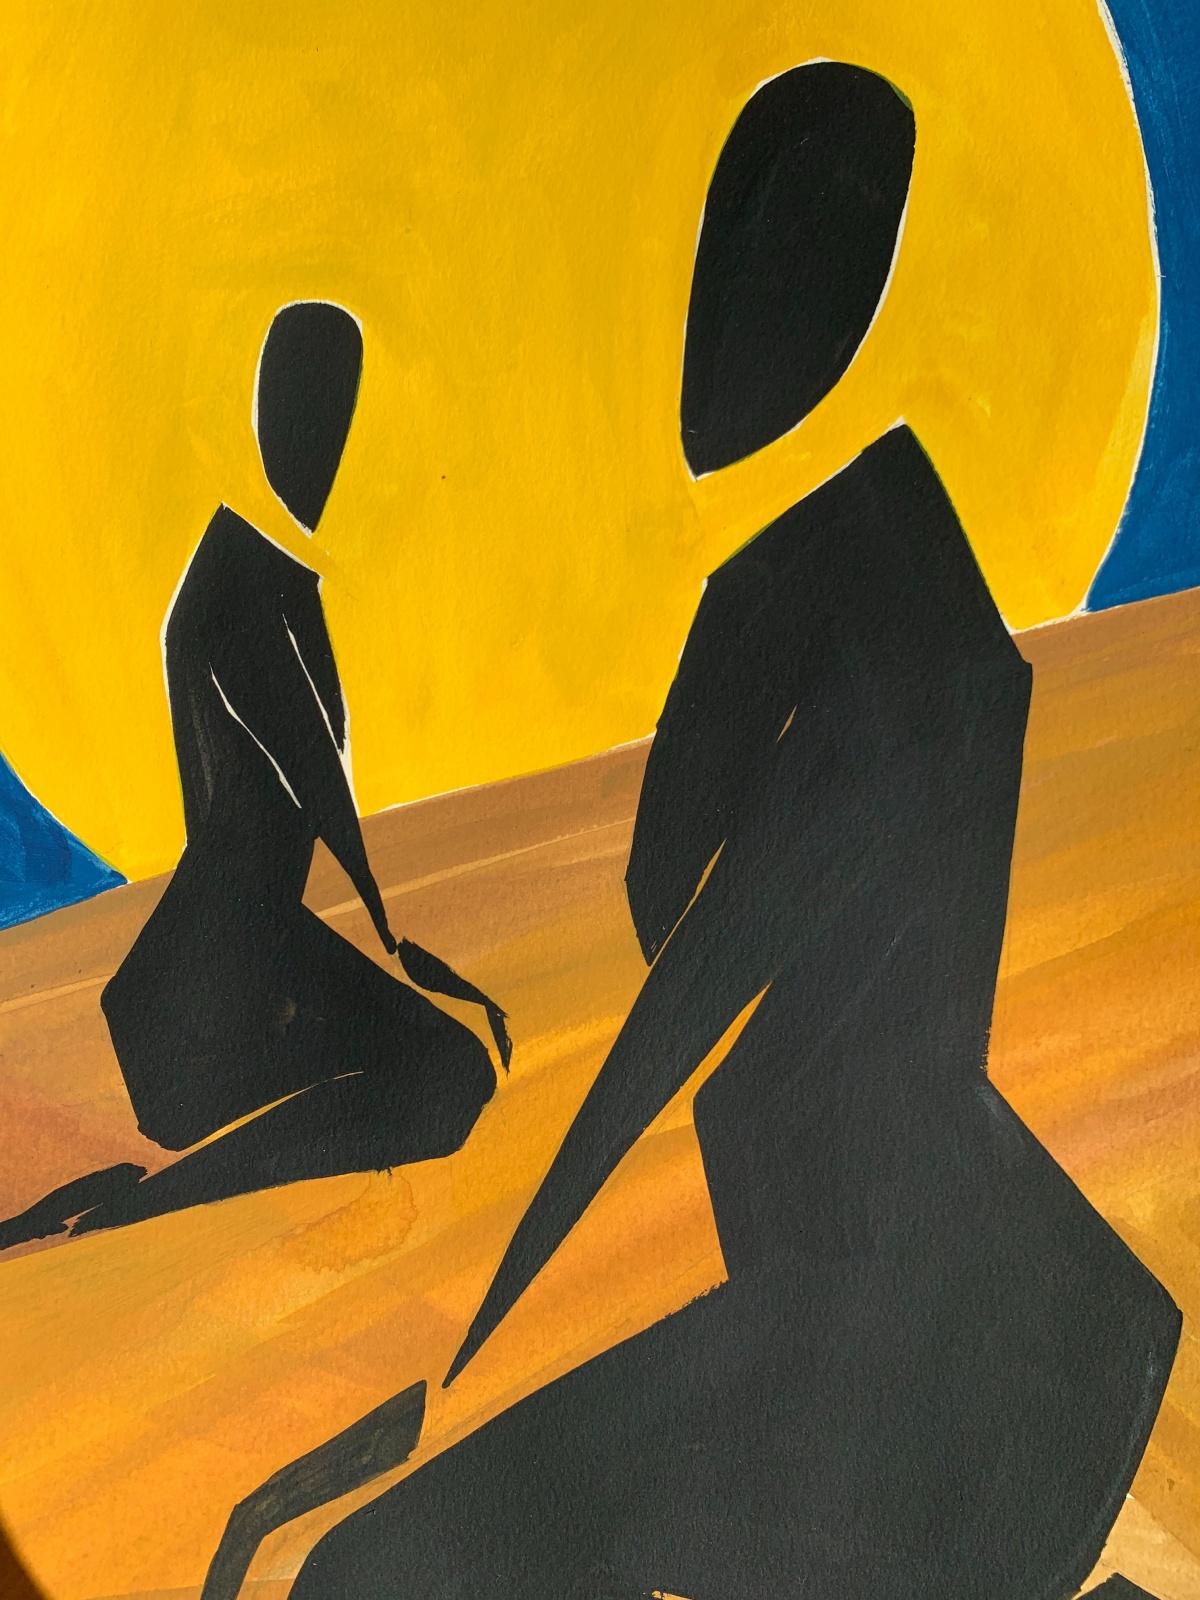 Arabian night 2 - Figurative Painting on Paper, Young art, Minimalism, Vibrant  For Sale 1